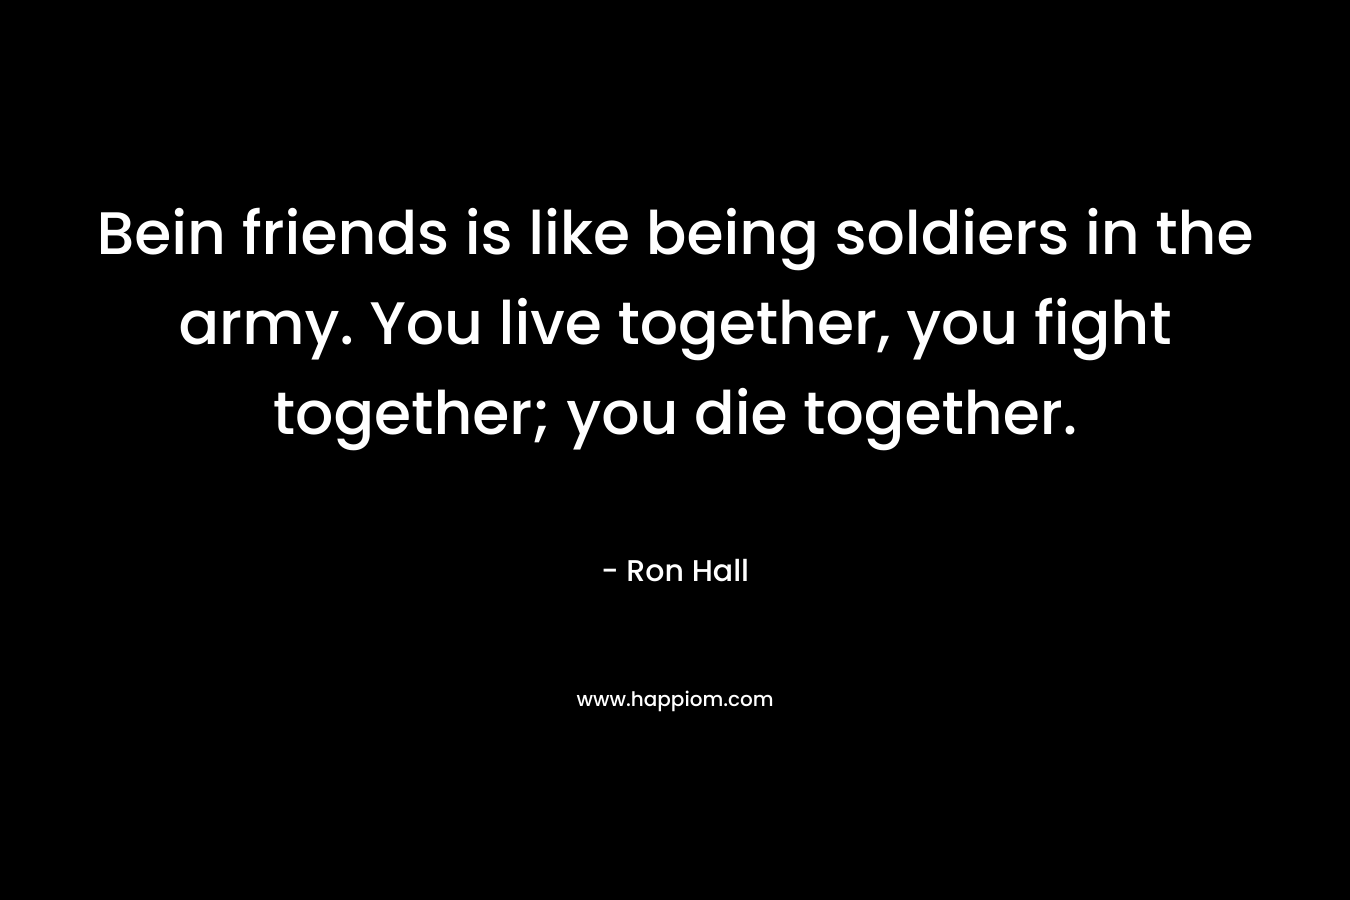 Bein friends is like being soldiers in the army. You live together, you fight together; you die together. – Ron Hall